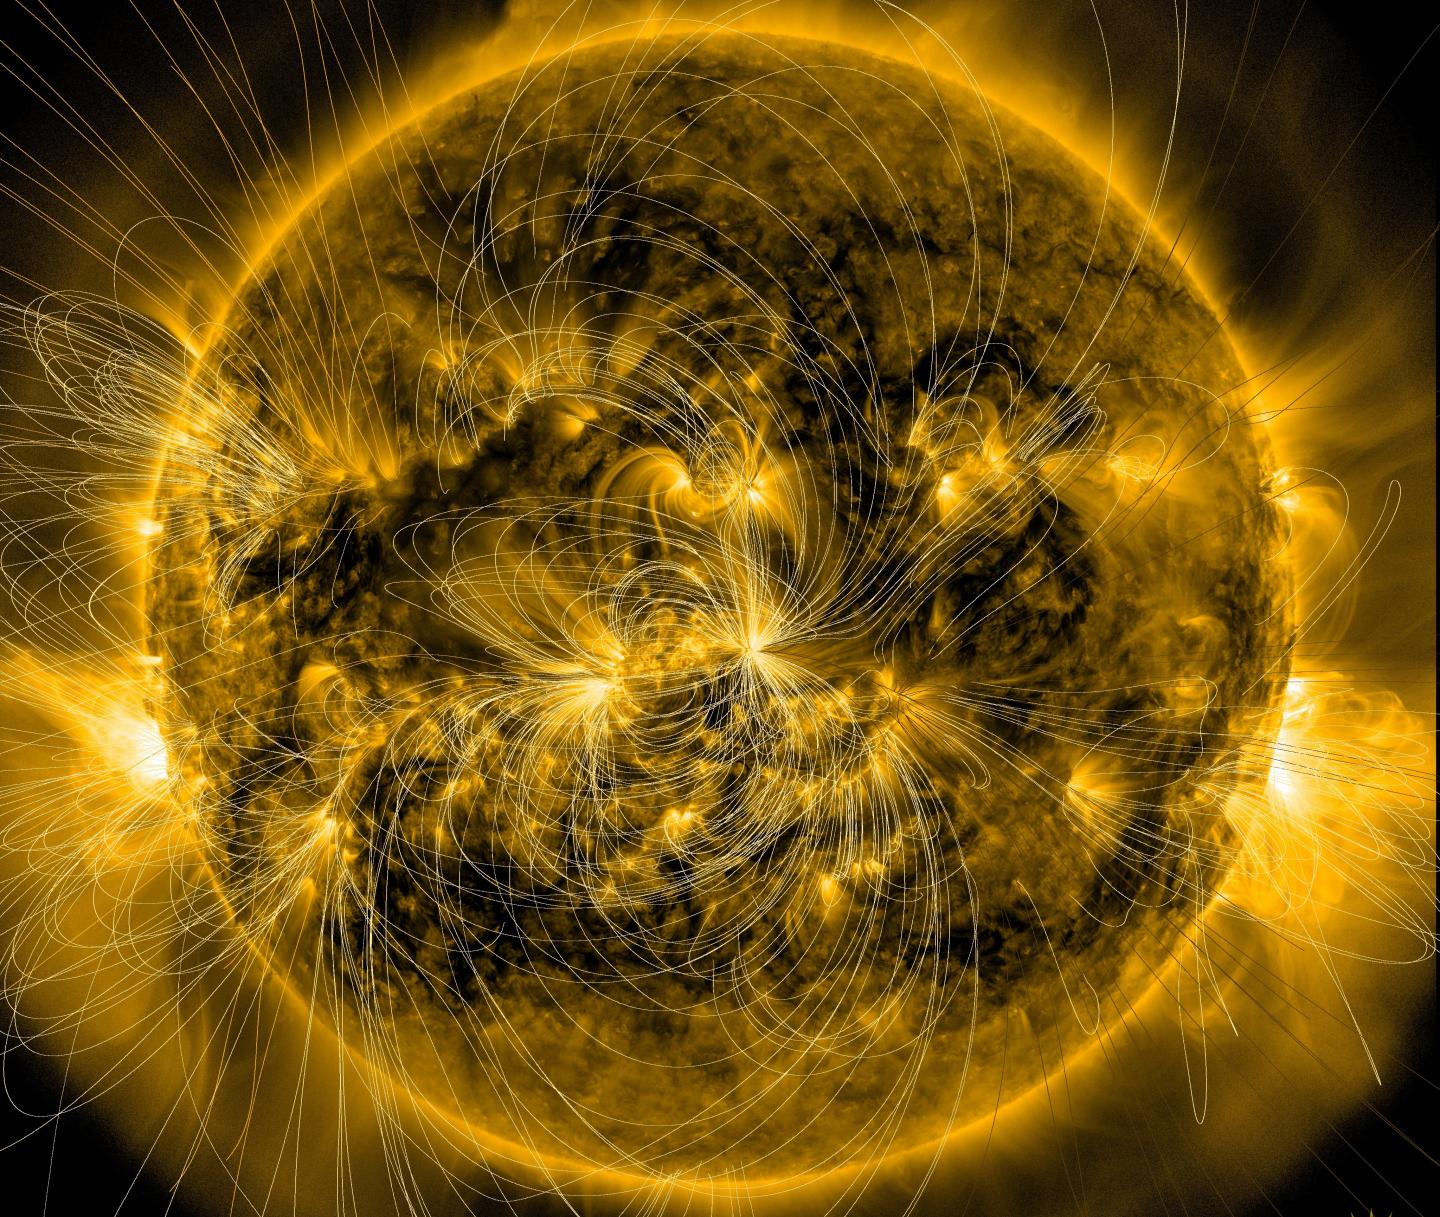 Sun Image with Model of Magnetic Field Lines